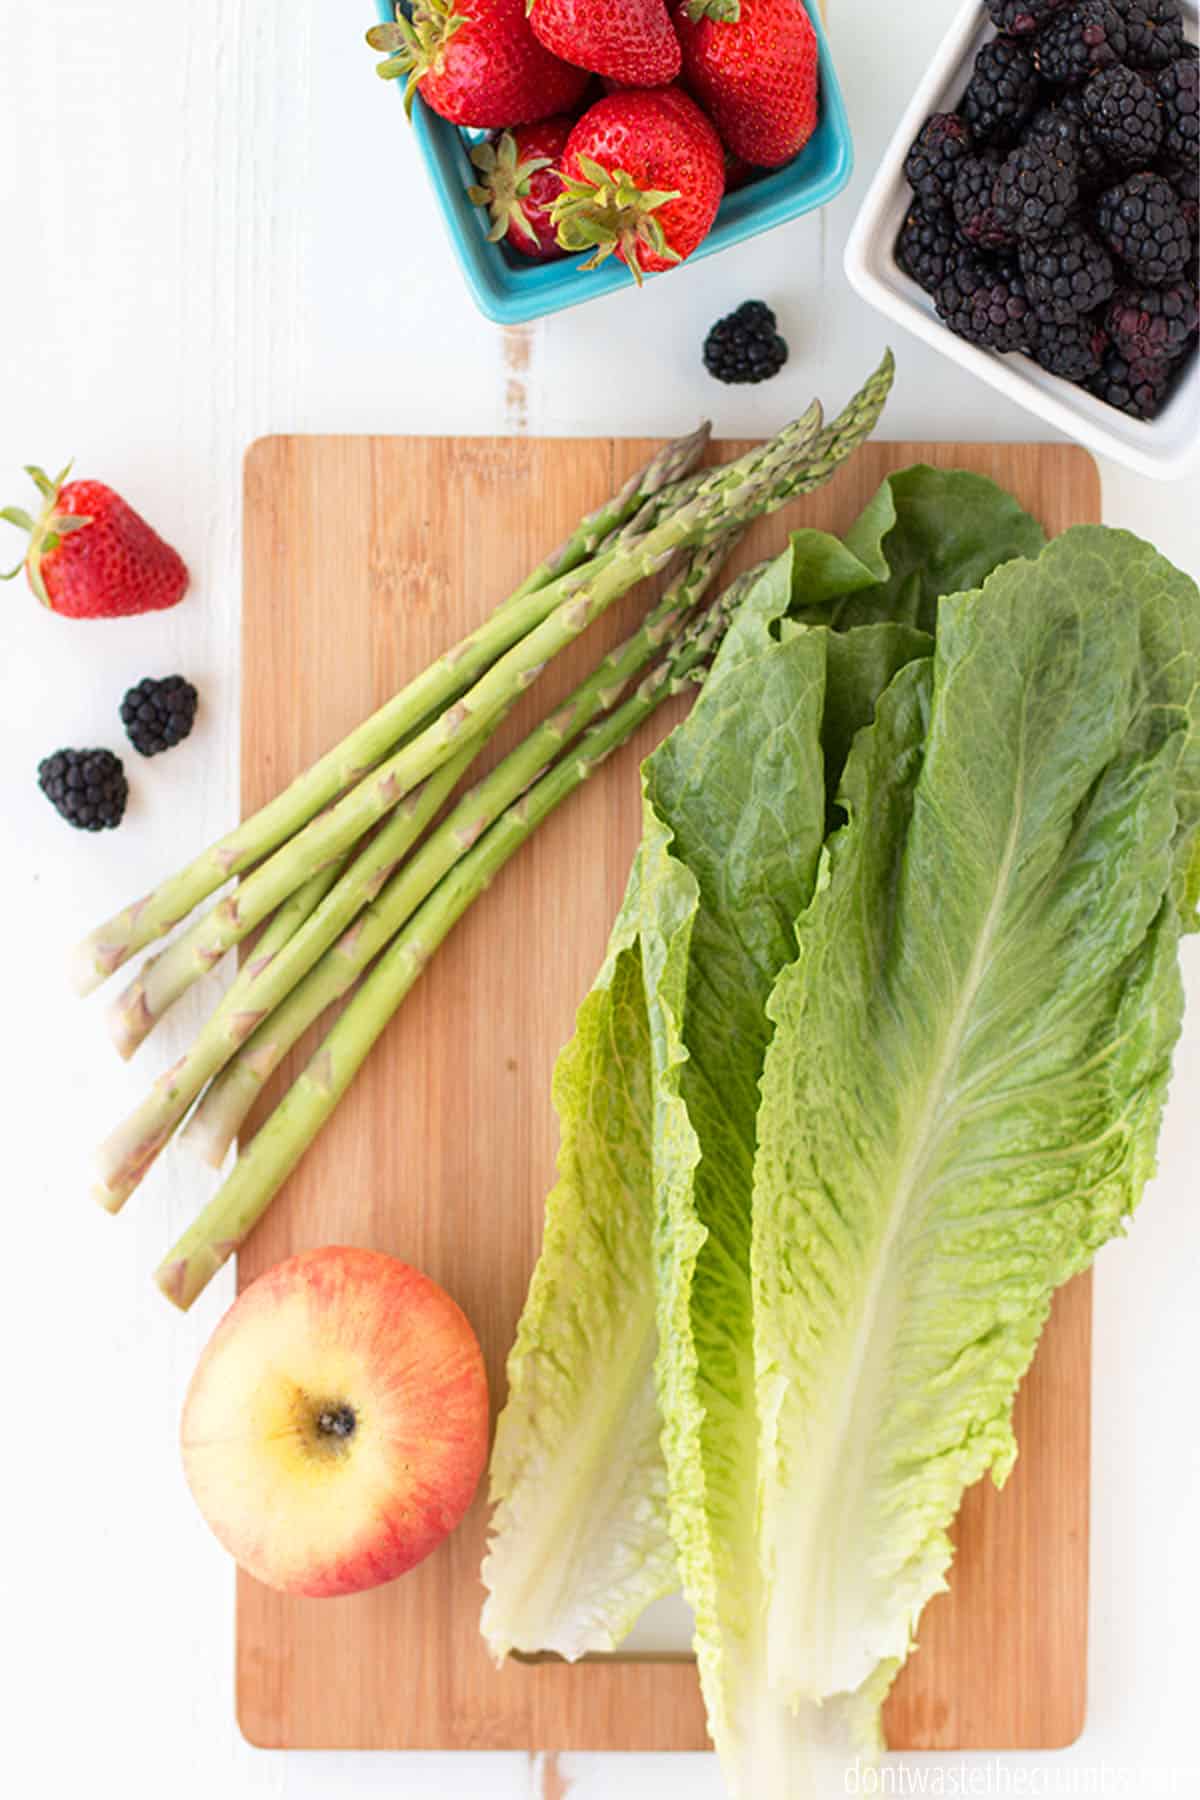 Cutting board with a bunch of asparagus, apple, and lettuce laying on it. On the left there is one strawberry and two blackberries. Above the cutting board there is a bowl of strawberries and a bowl of blackberries.